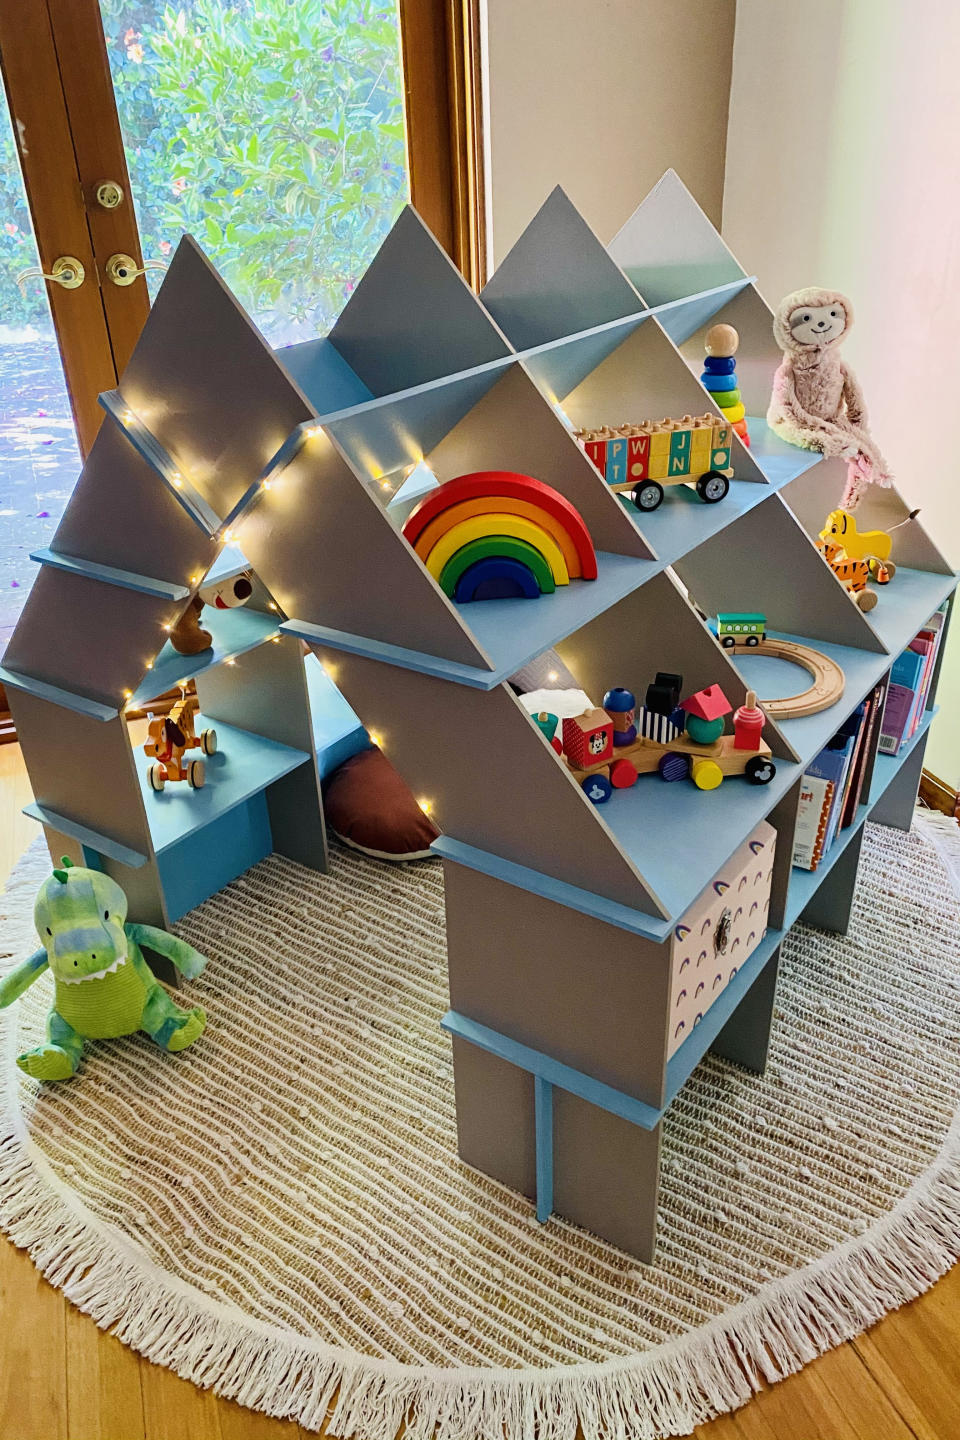 Bump2Bub's 'Creative Cubby', painted blue and set up with toys stored in the sides